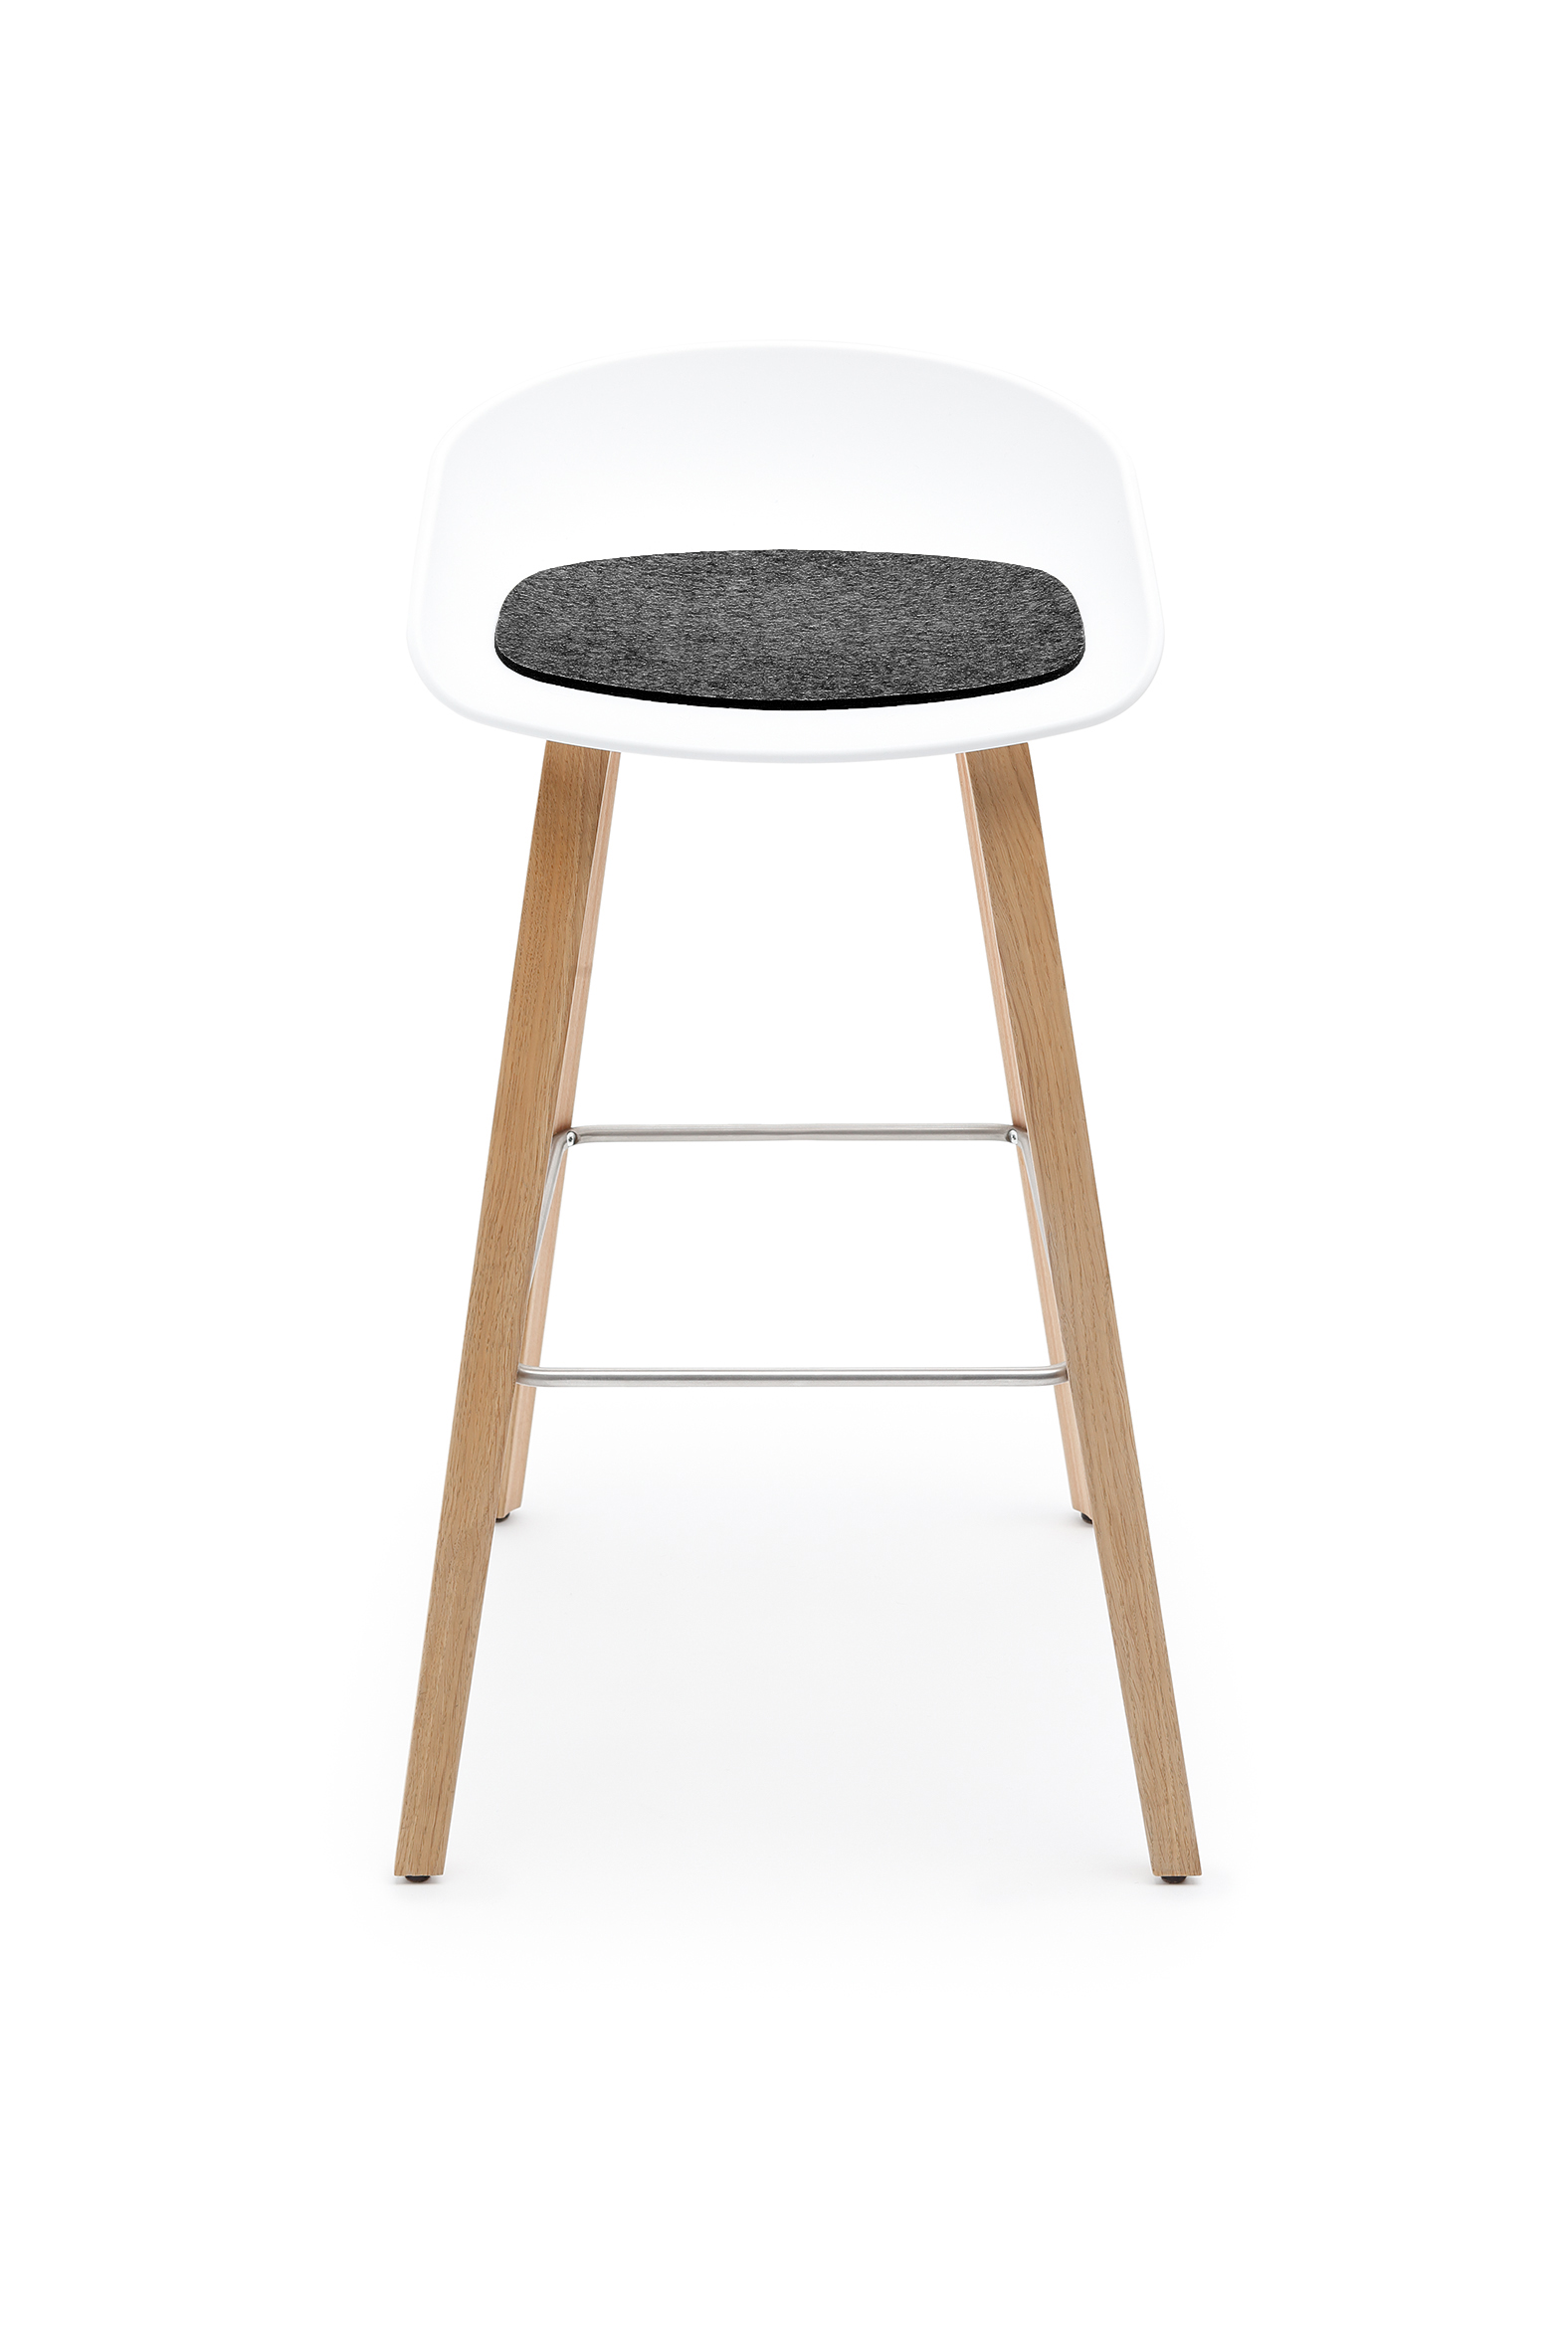 collecties/786/HEY-SIGN_About_A_Stool-16_5876_f08.jpg